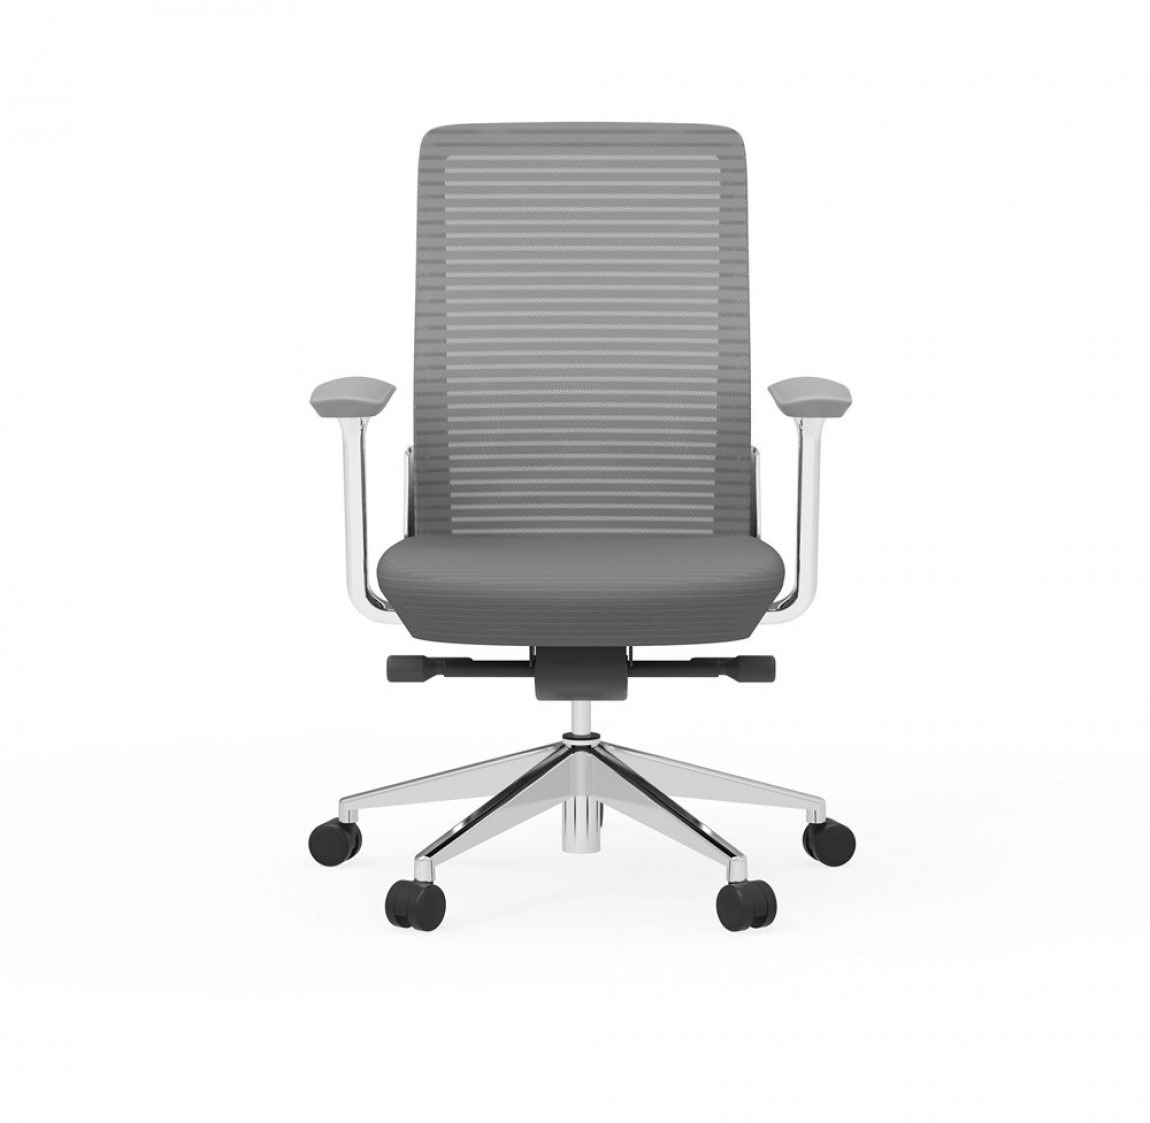 Gray Mesh Back Conference Room Chair